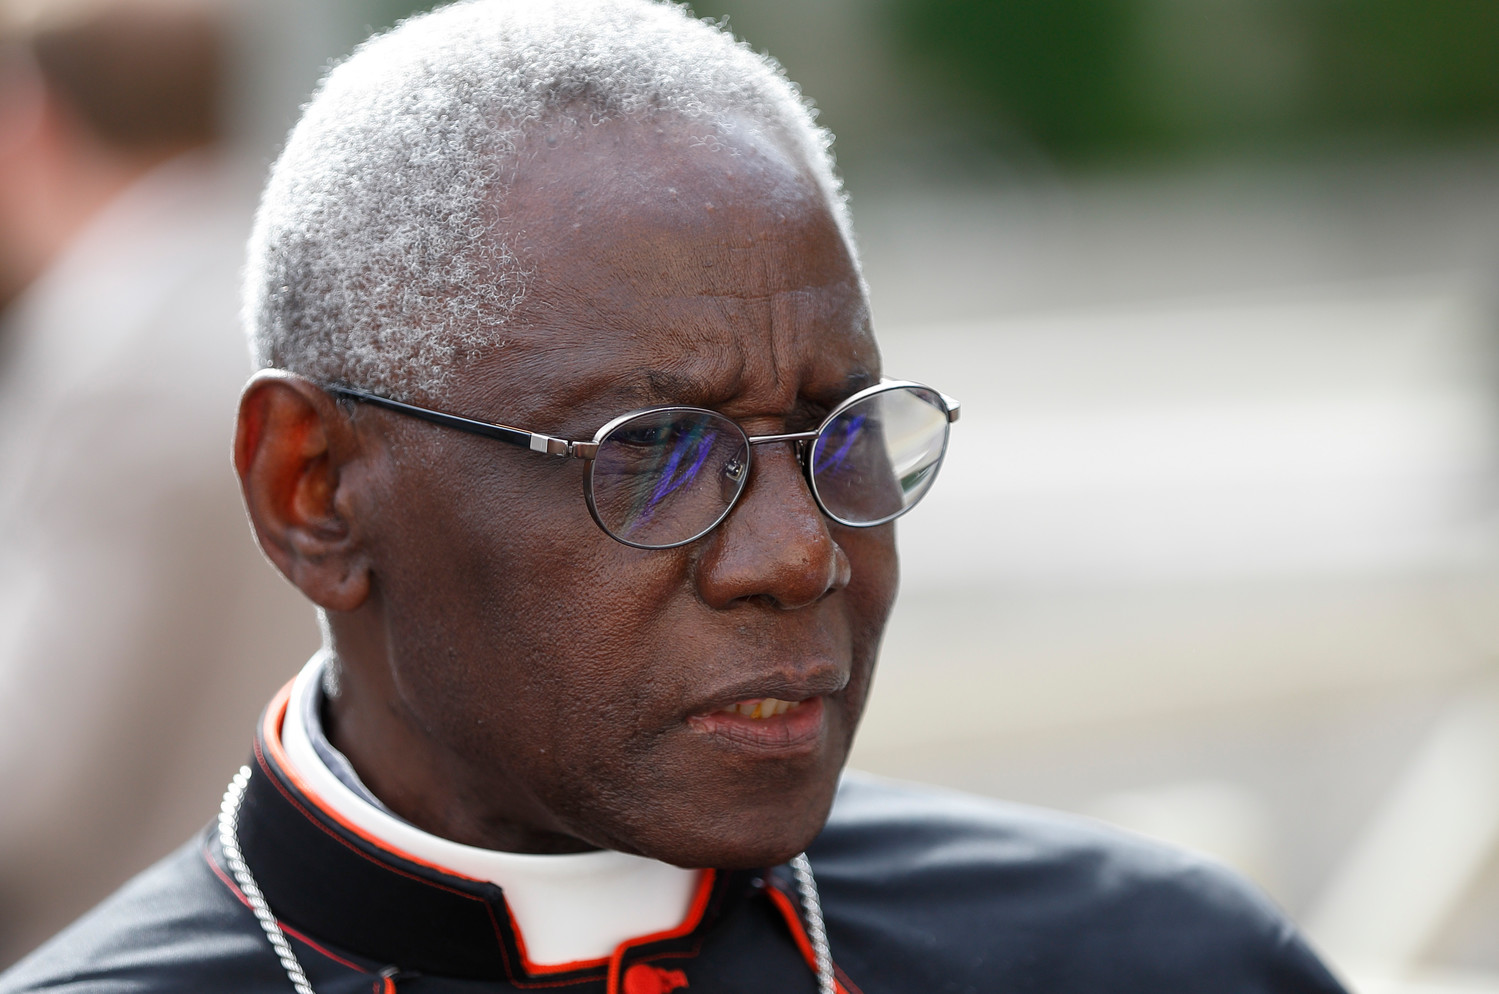 Cardinal Robert Sarah, prefect of the Congregation for Divine Worship and the Sacraments, is pictured after a session of the Synod of Bishops on young people, the faith and vocational discernment at the Vatican Oct. 16. Cardinal Sarah told the synod that just because some young people disagree with Catholic morality does not mean the Church’s teachings are unclear or should change.